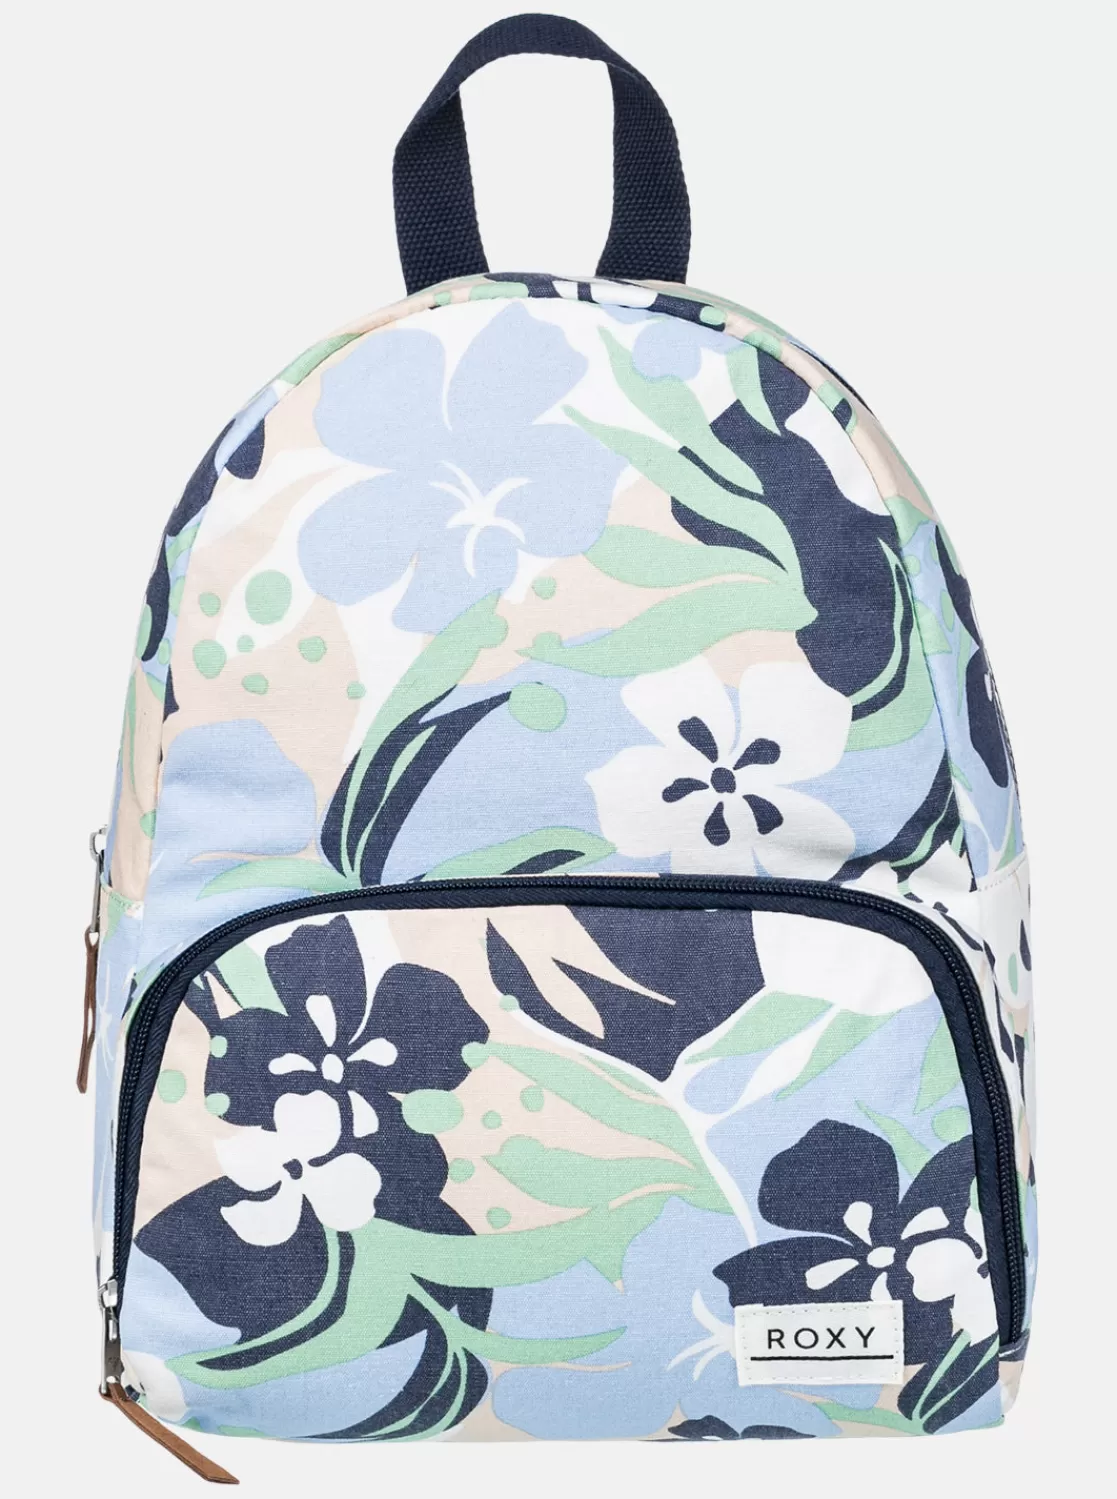 Always Core Canvas Extra Small Backpack-ROXY Clearance